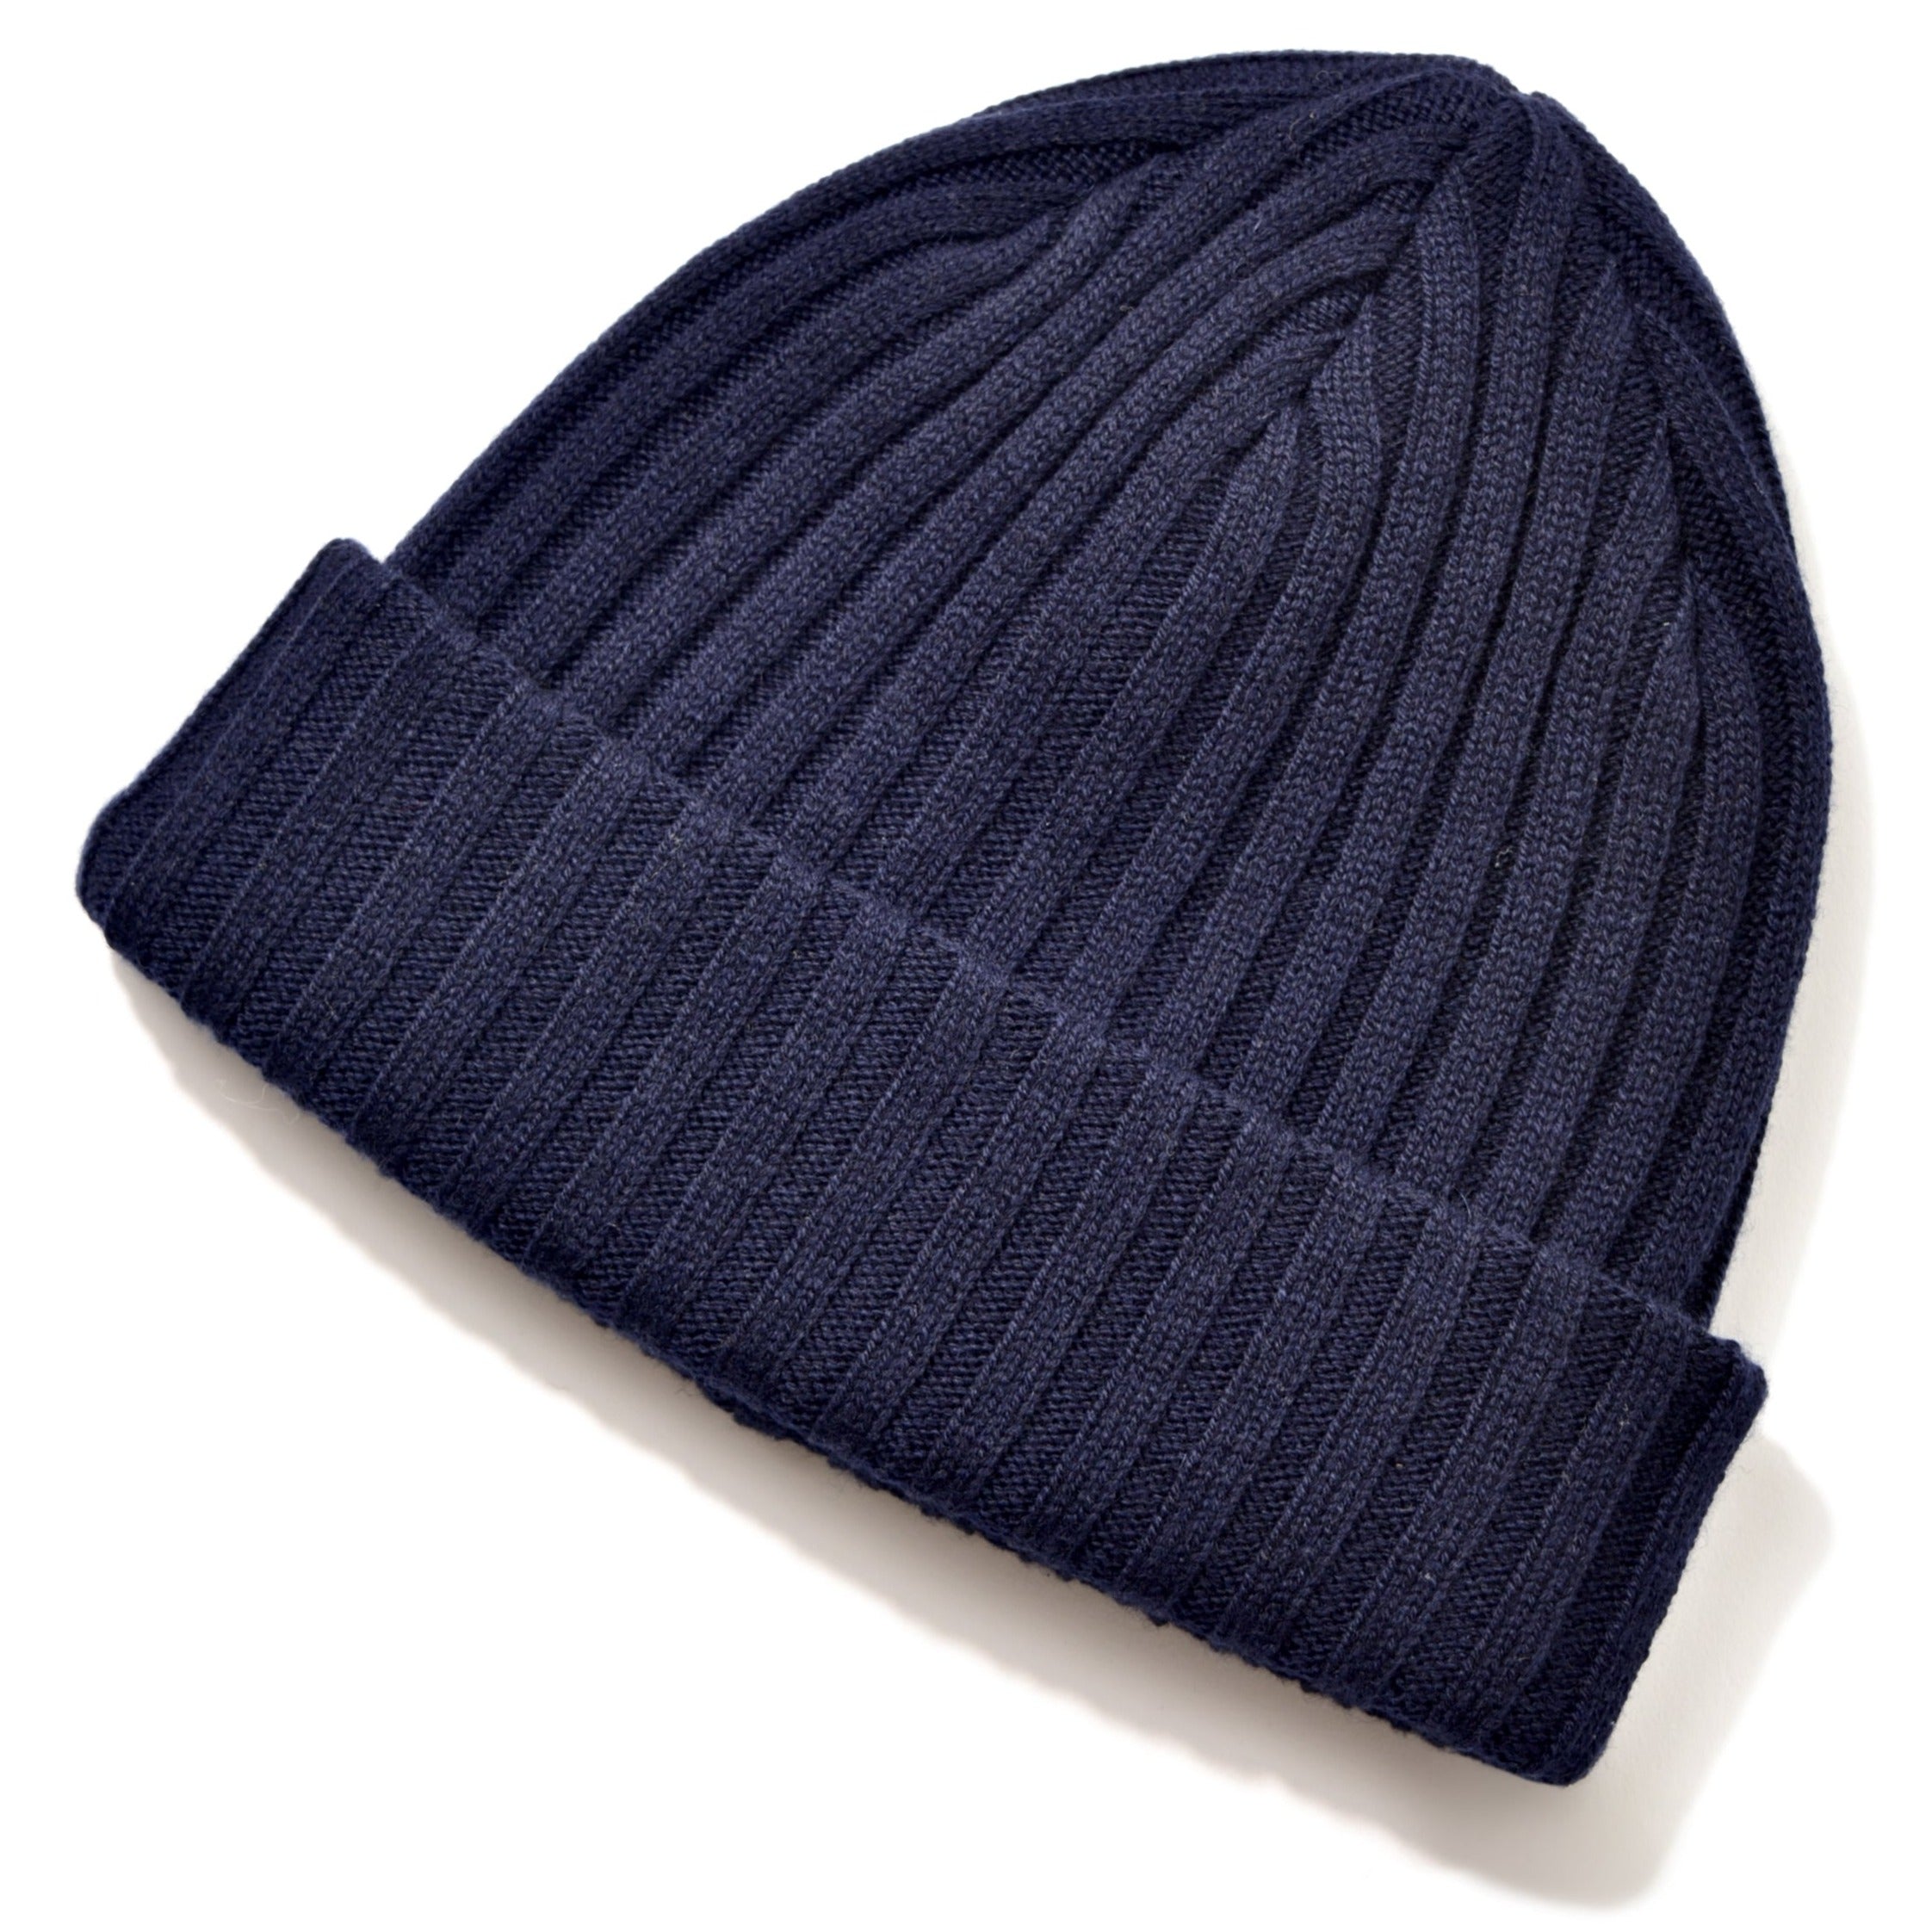 WOOL CASHMERE KNIT CAP – The Real McCoy's